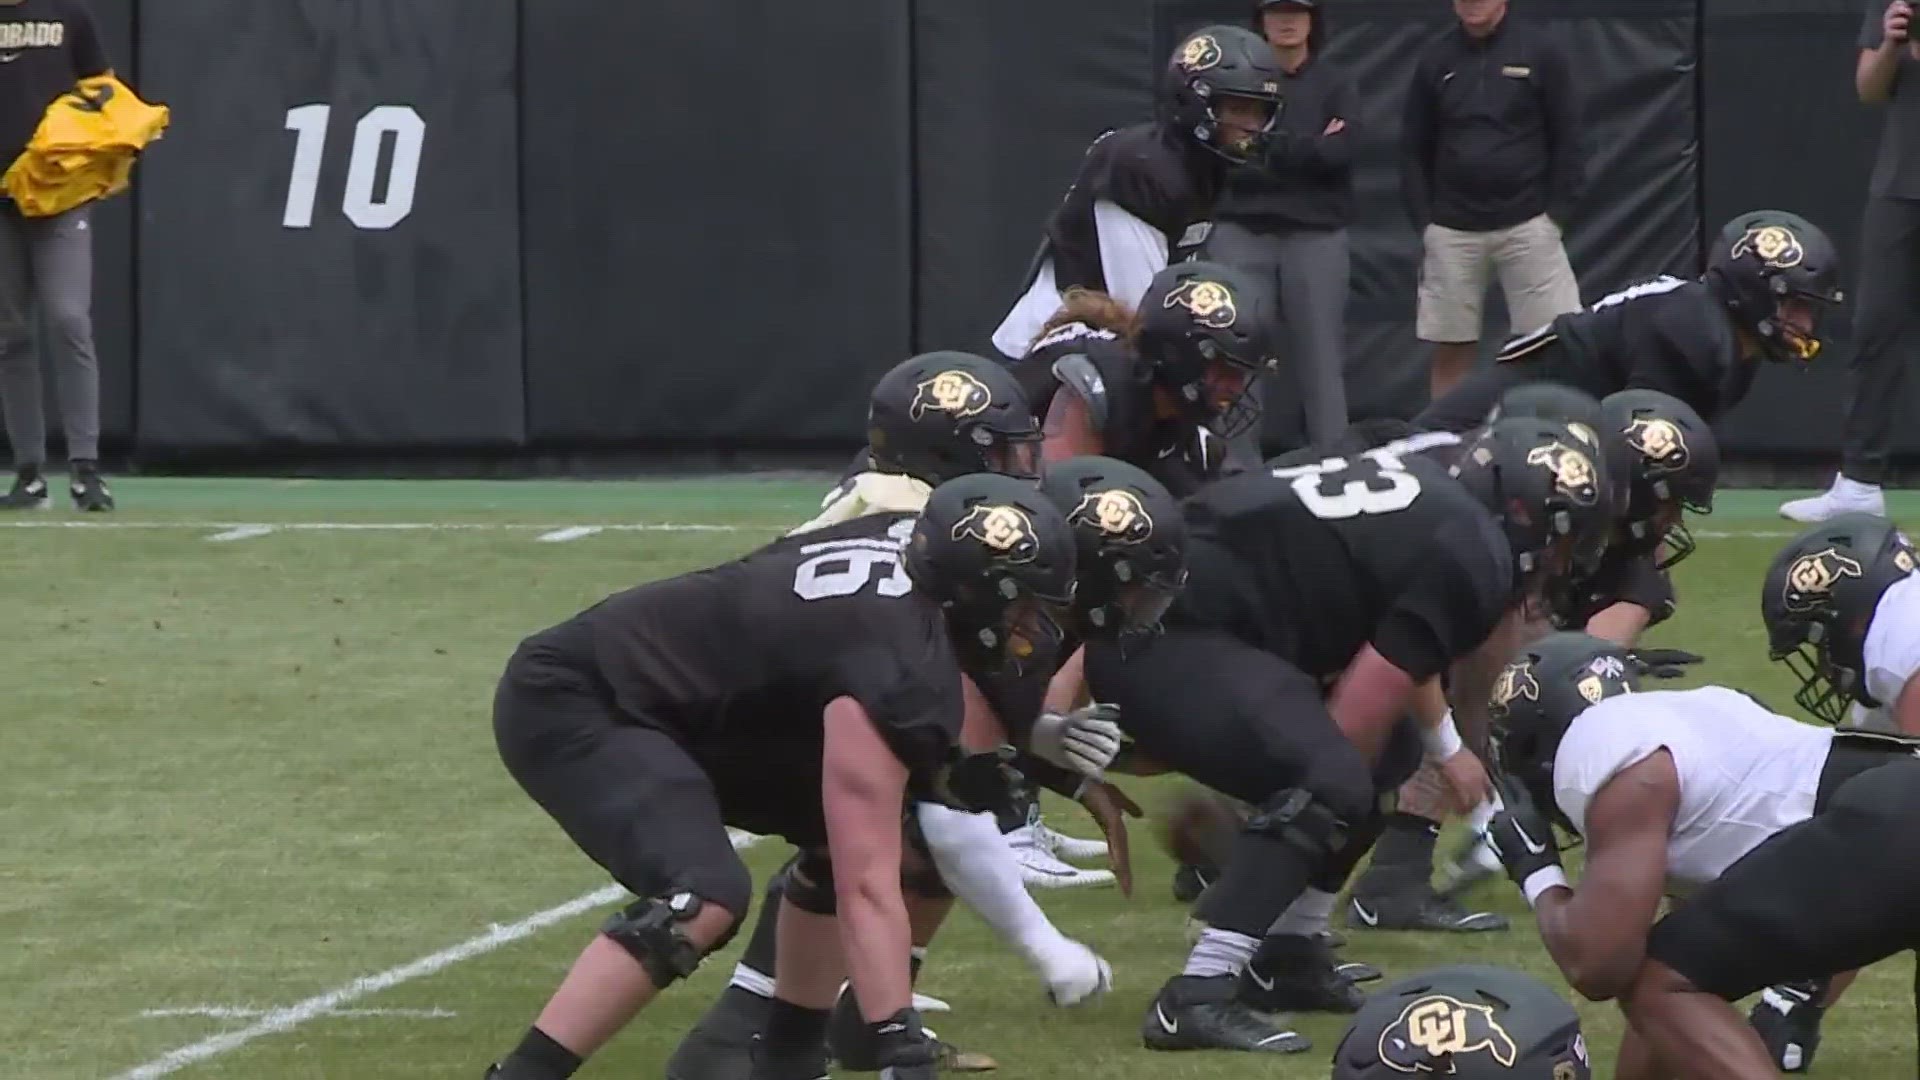 The CU football program's Black and Gold Day includes an intrasquad football game at Folsom Field and other family-friendly activities and autograph sessions.